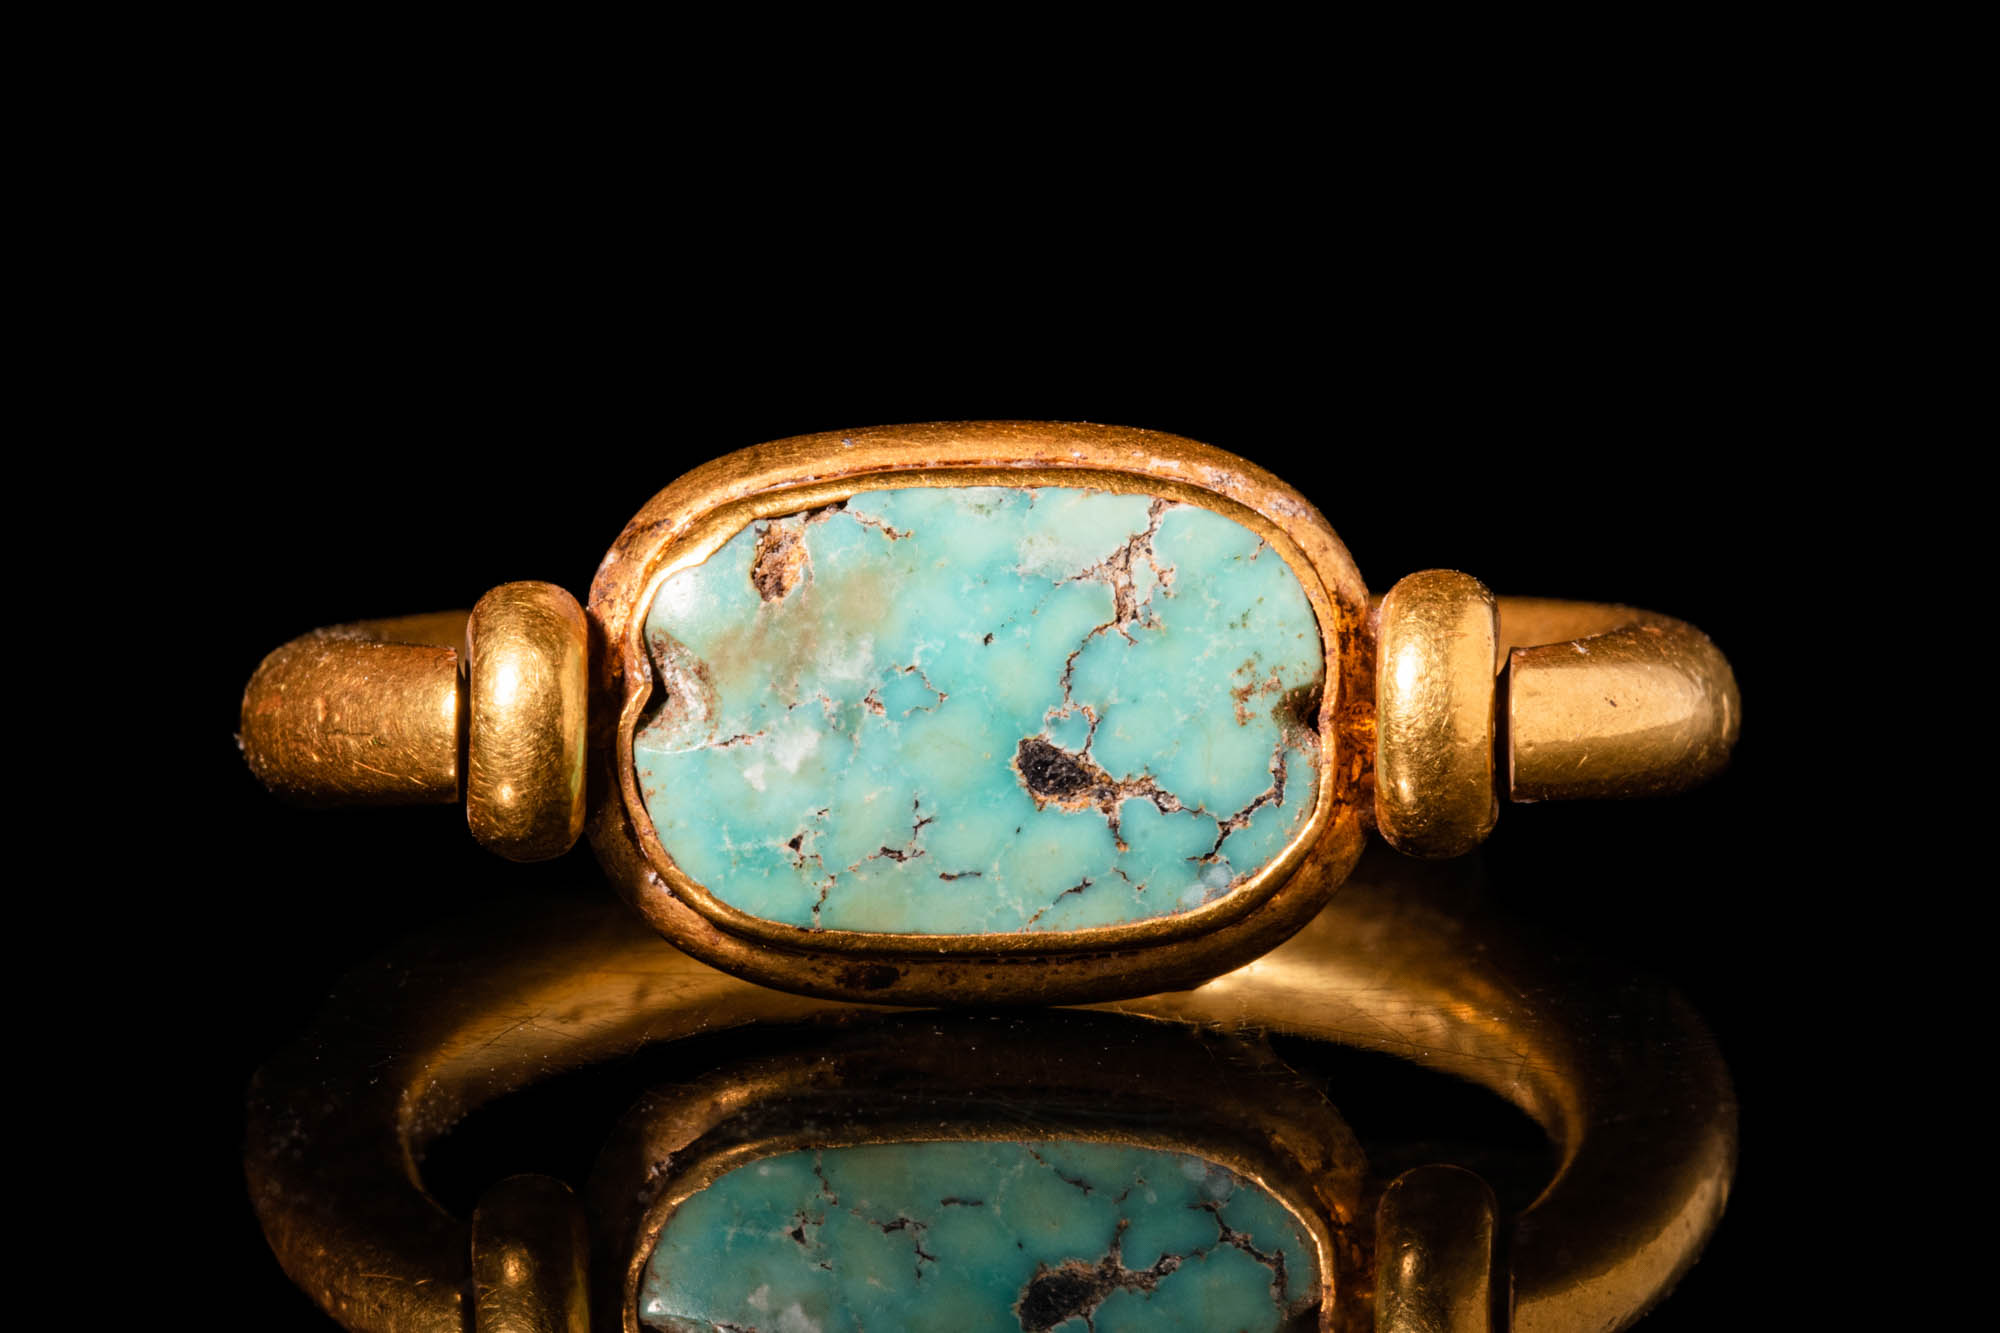 EGYPTIAN GOLD FINGER RING WITH TURQUOISE BEZEL - Image 2 of 5